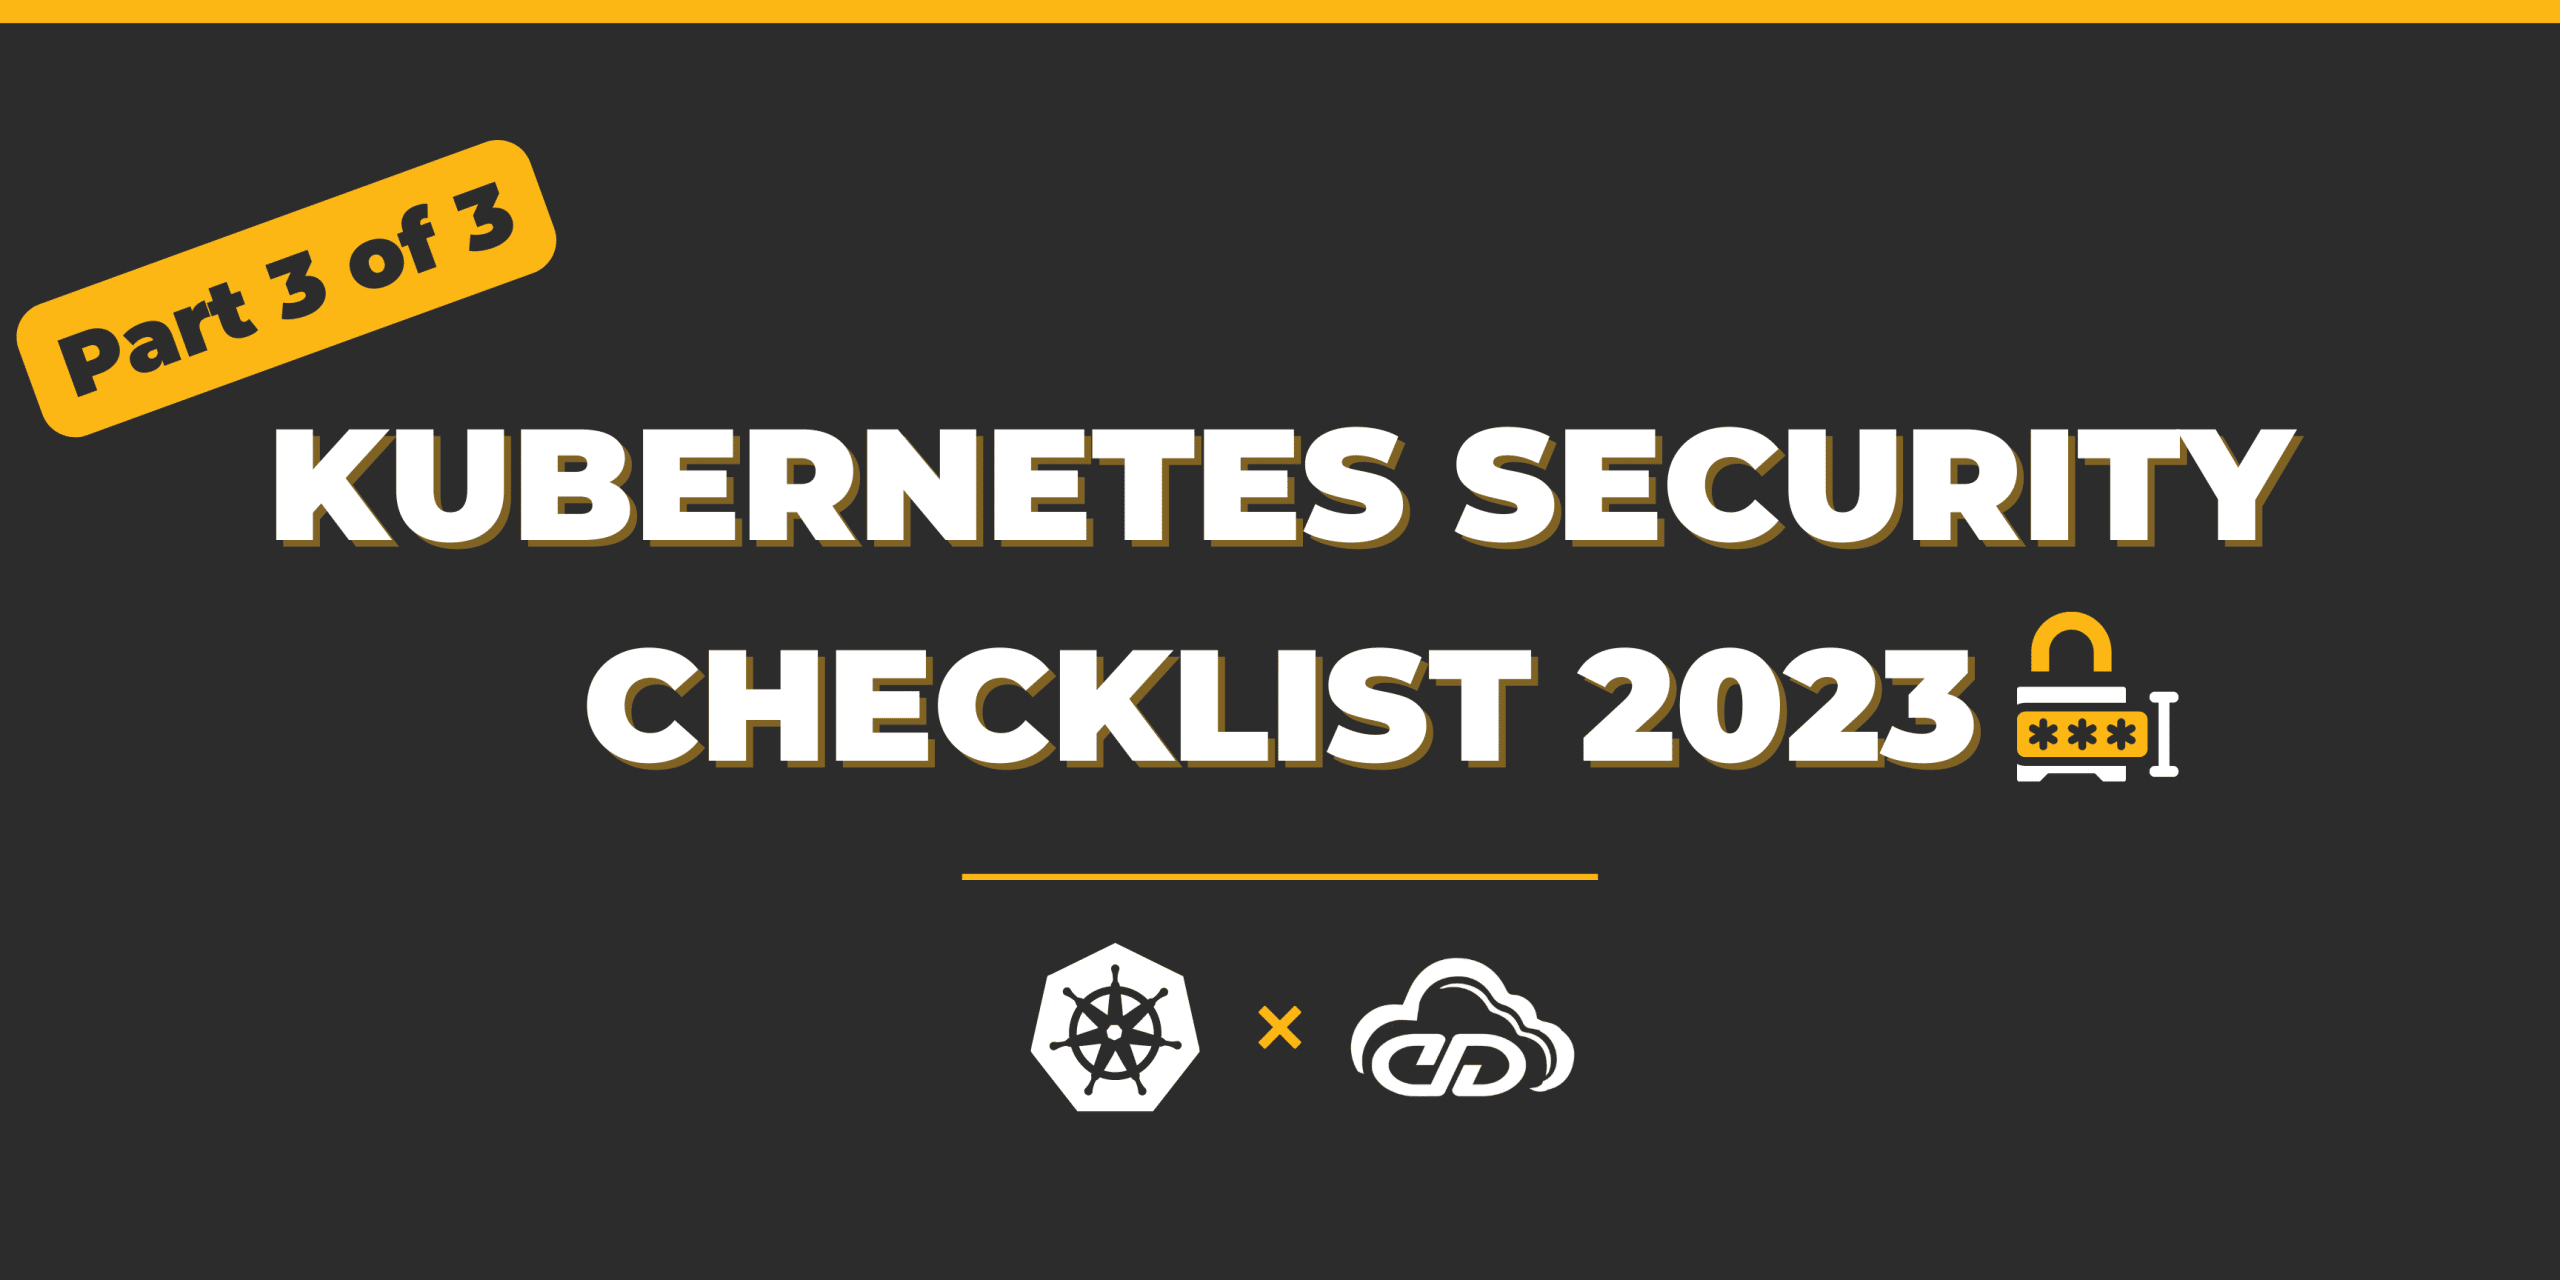 Kubernetes Security Checklist 2023 [Part 3 of 3]